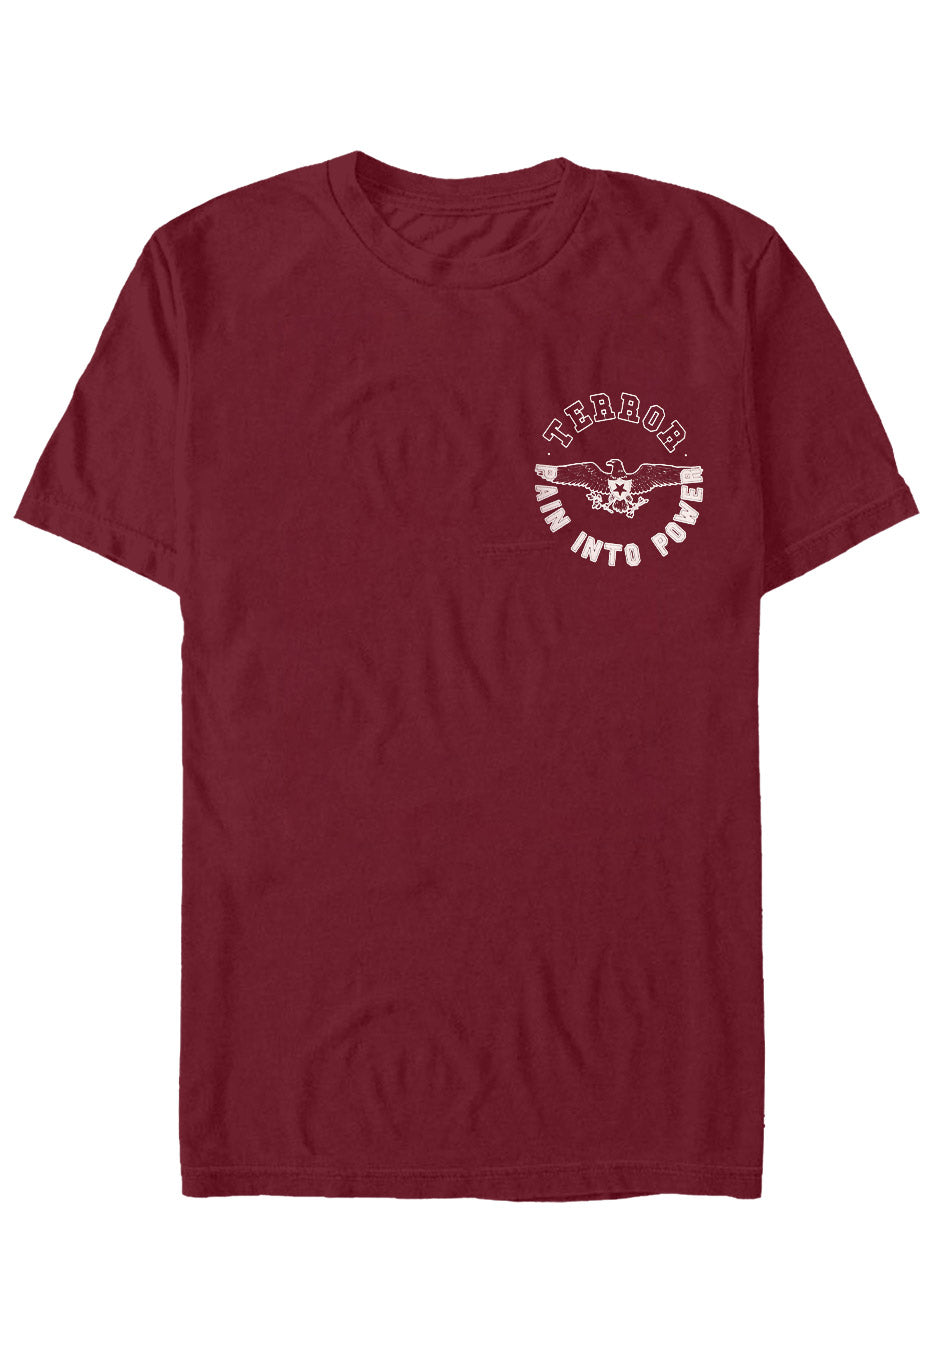 Terror - Pain Into Power Forest Burgundy - T-Shirt